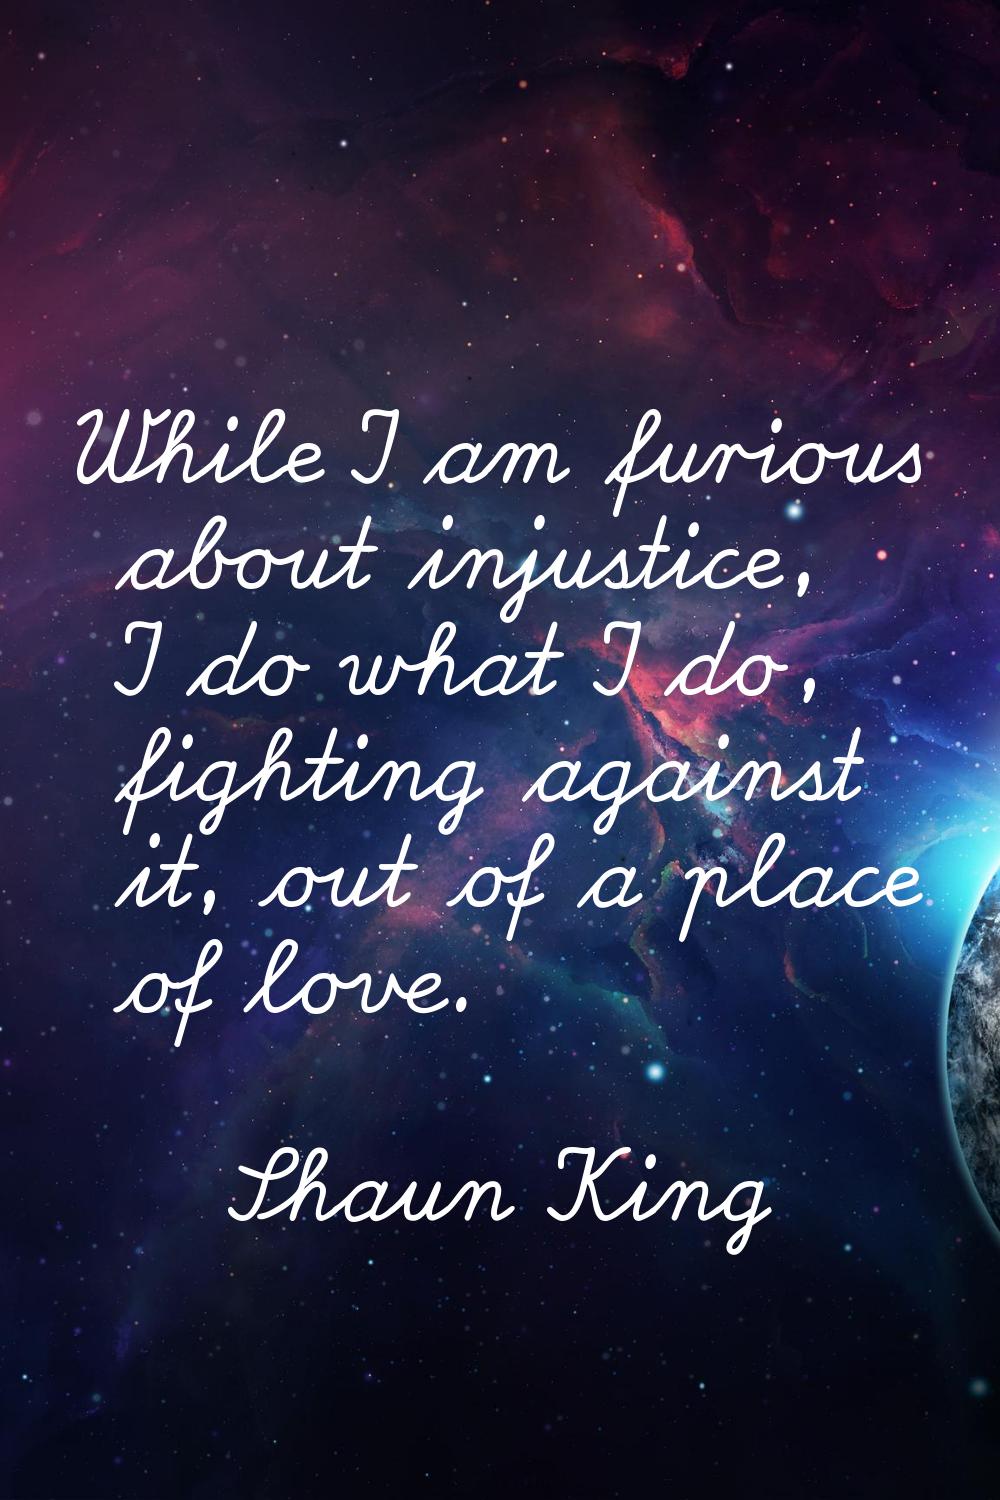 While I am furious about injustice, I do what I do, fighting against it, out of a place of love.